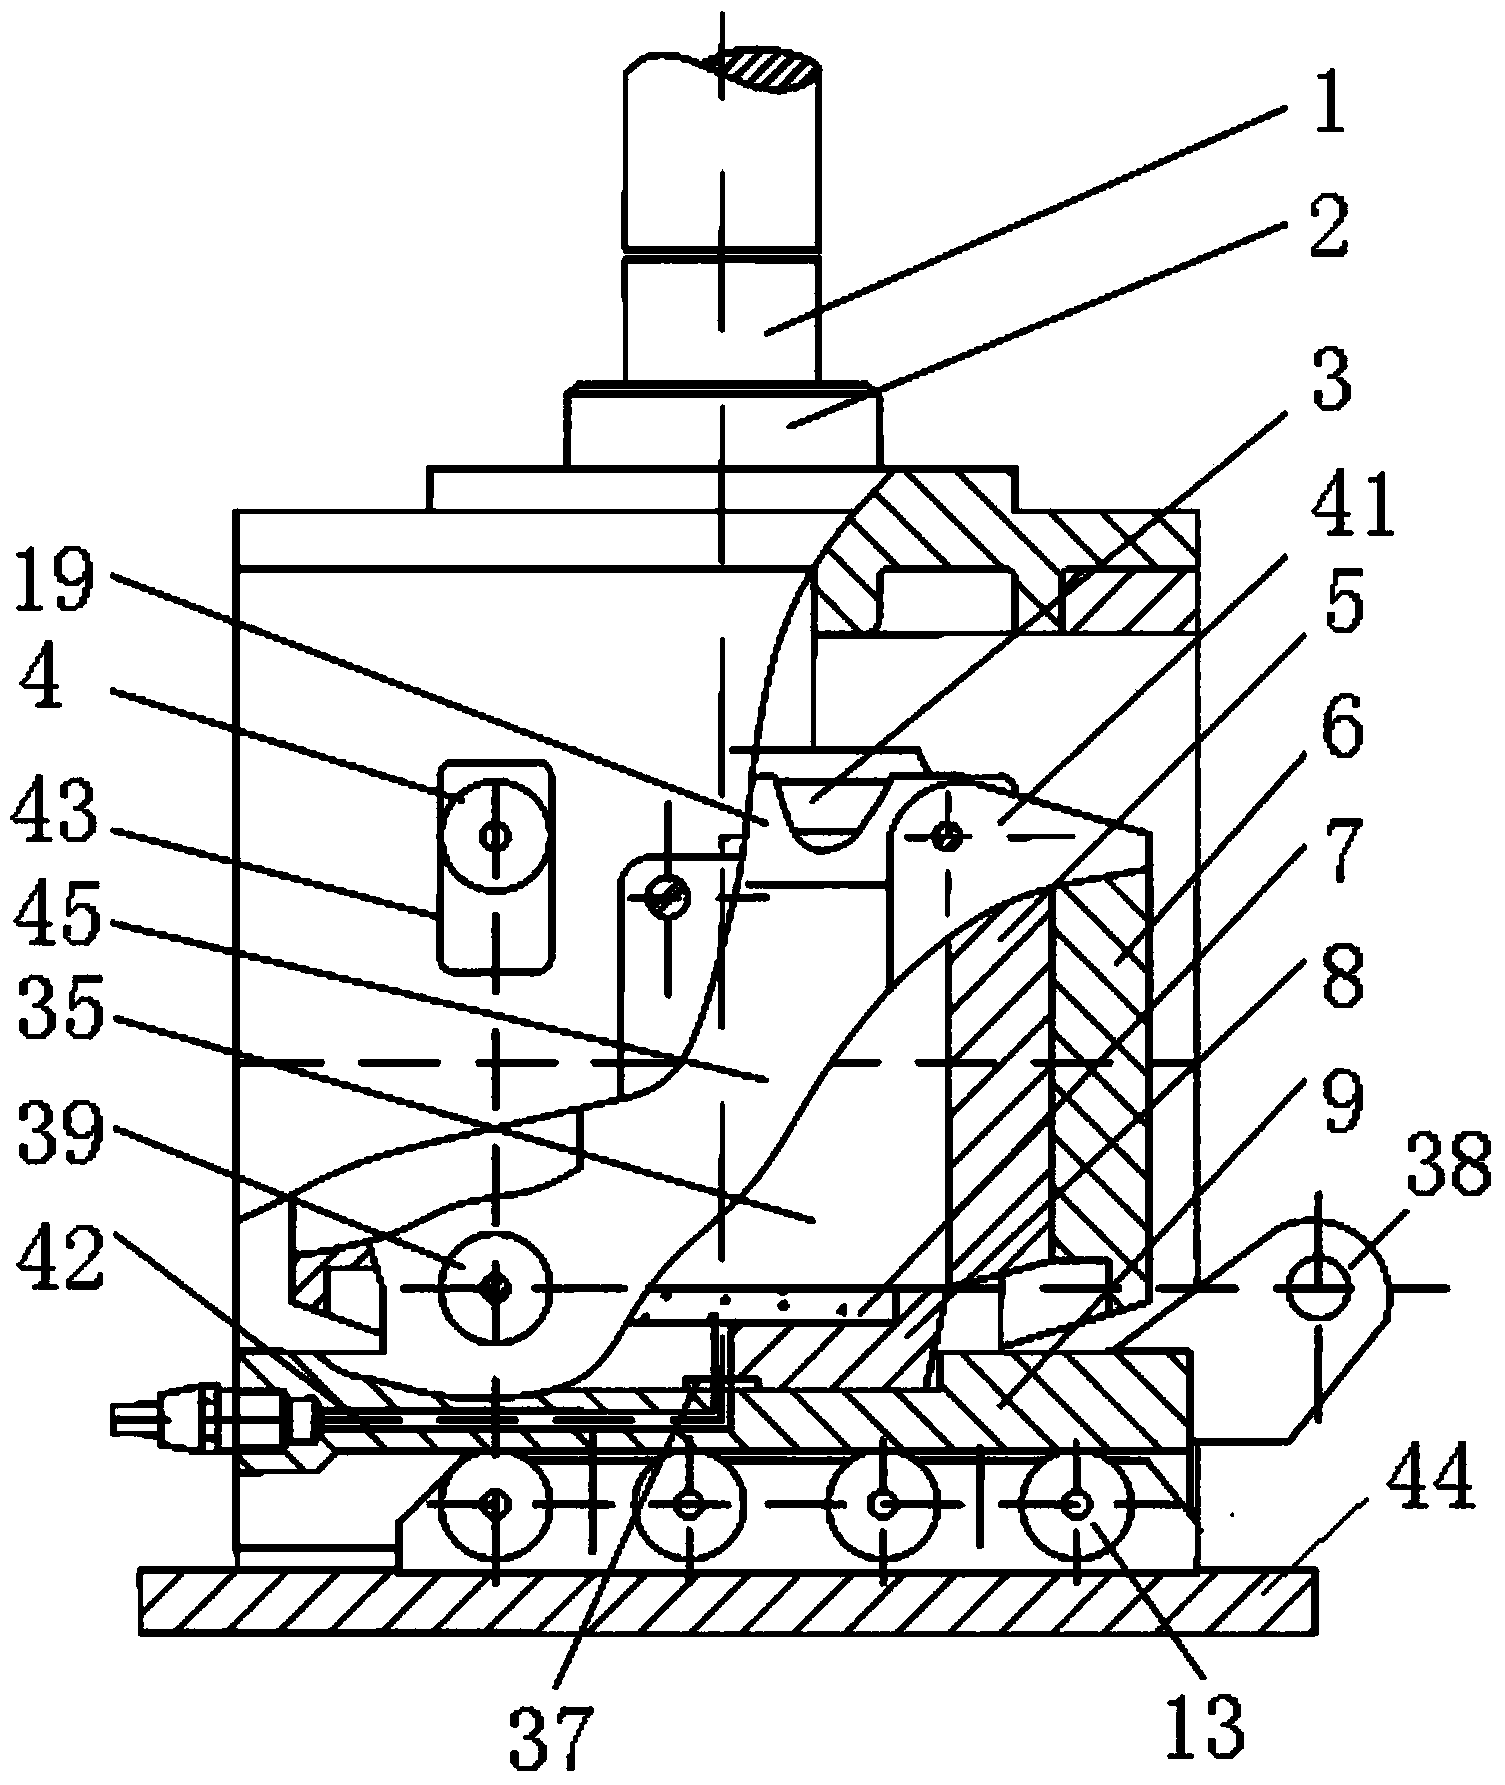 Dynamic simple shear apparatus of servo cylinder-driven cubic articulated mechanism